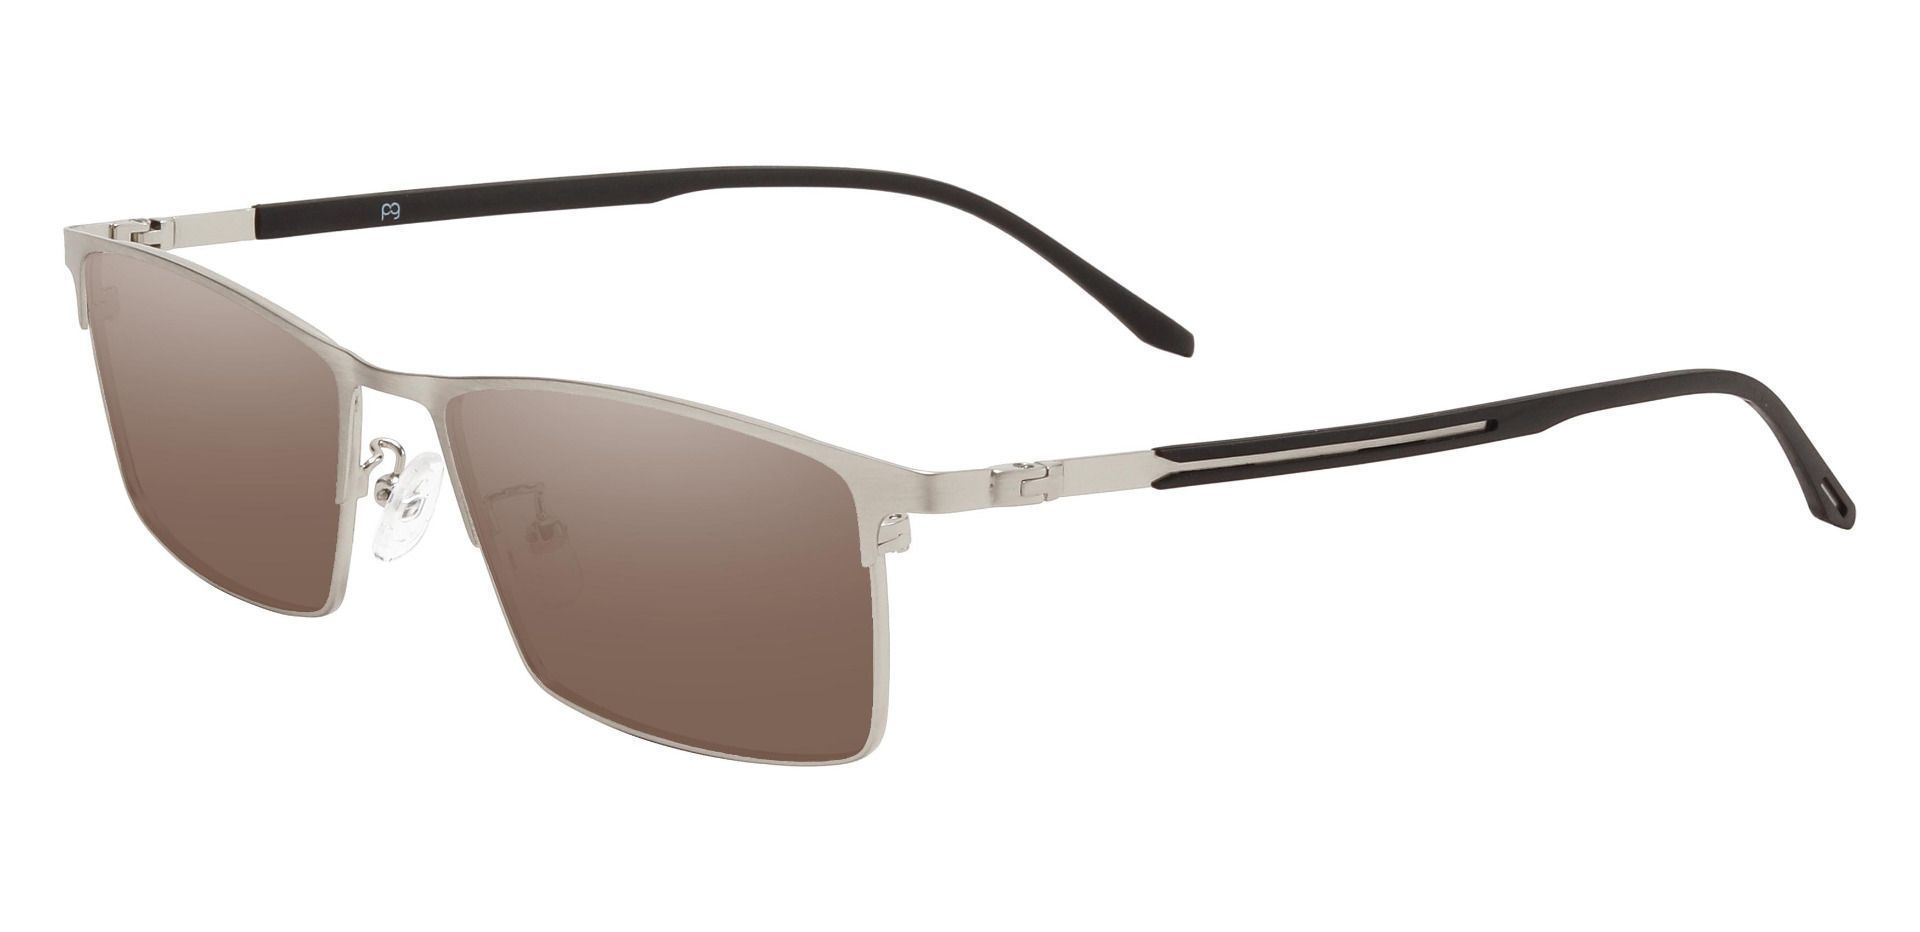 Regis Rectangle Non-Rx Sunglasses - Silver Frame With Brown Lenses